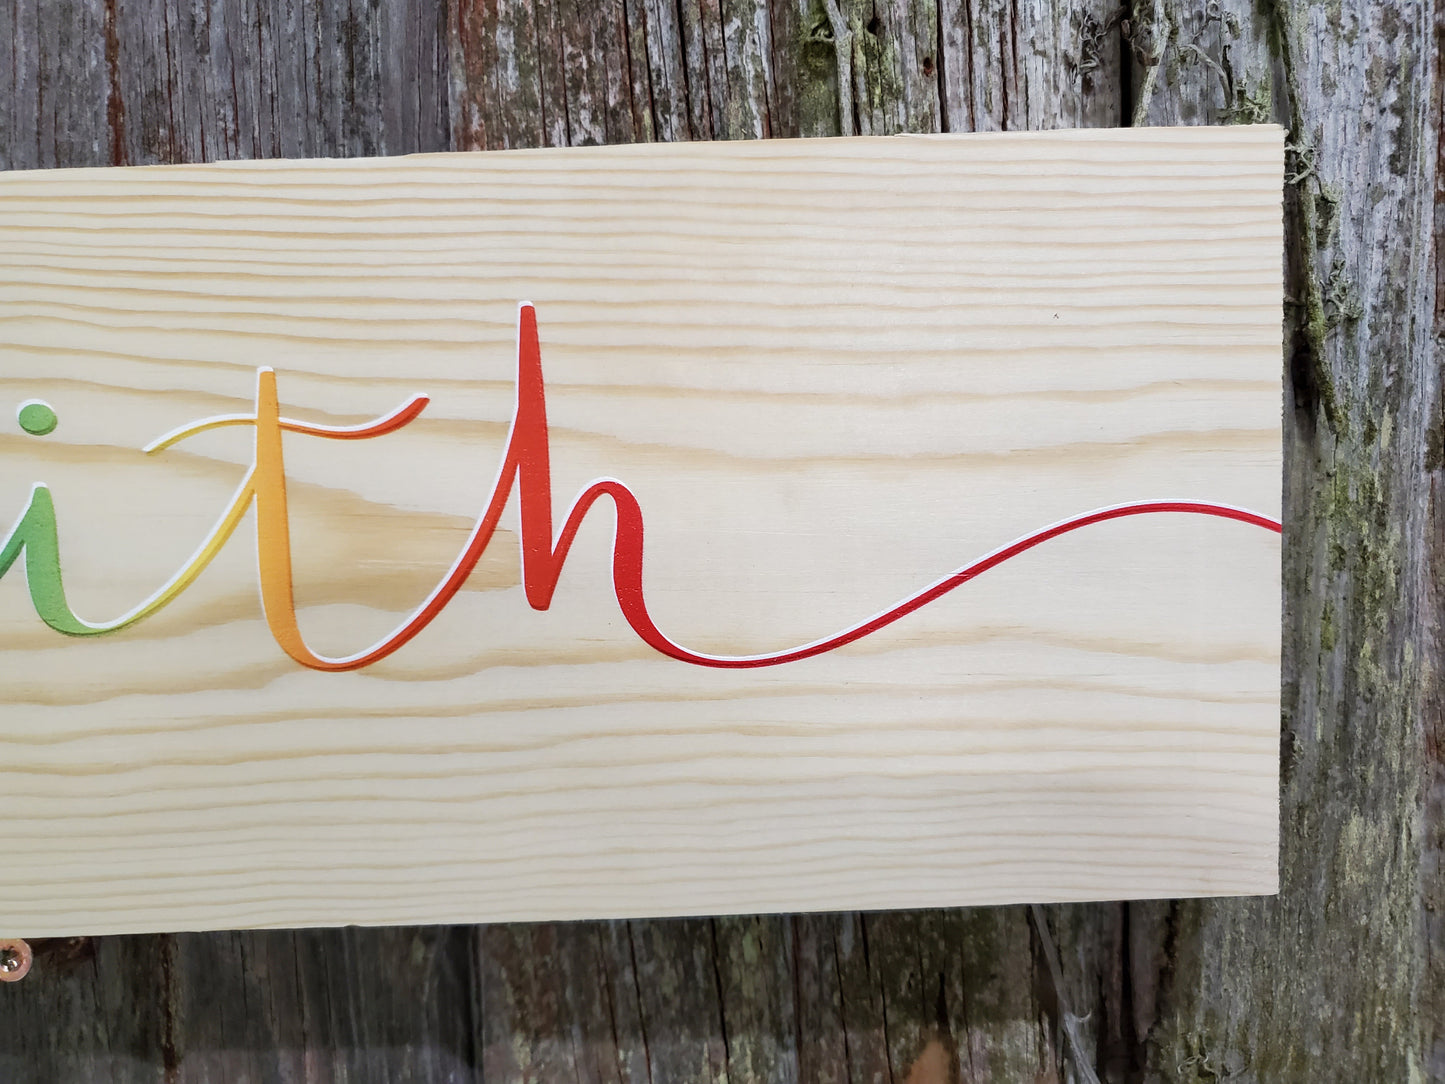 Have Faith Wall Decor Wood Sign Rainbow Bright Colors Art Script Writing Gift Colored Wood Print Gift Encouragement